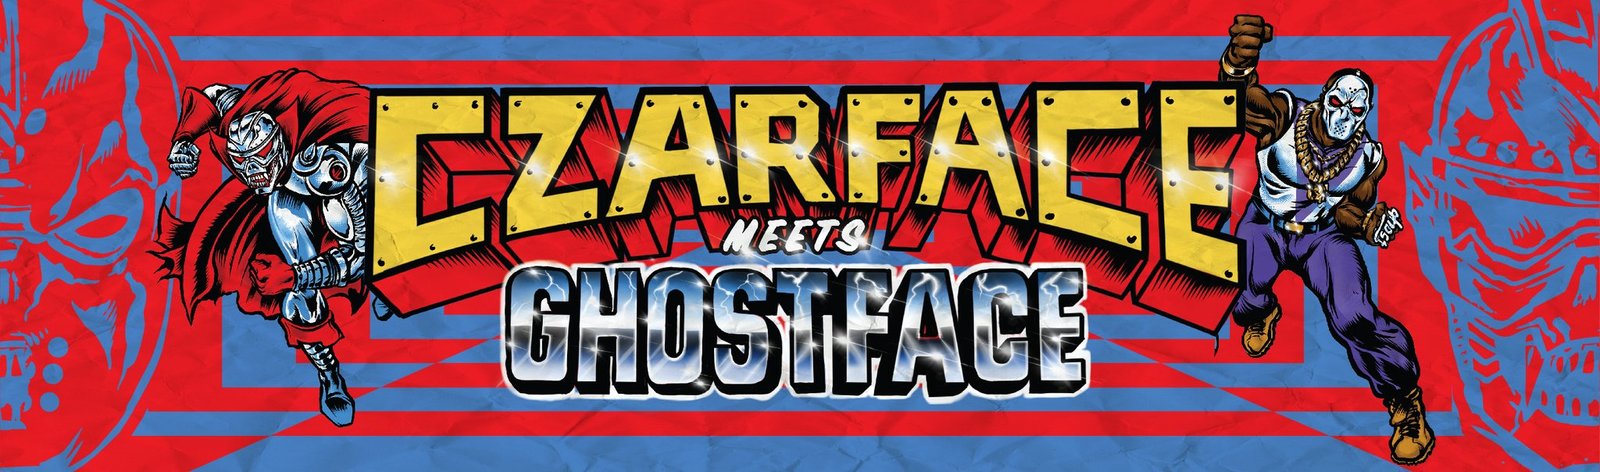 Hip-Hop Supergroup Czarface Joins Forces with Ghostface Killah for New Album